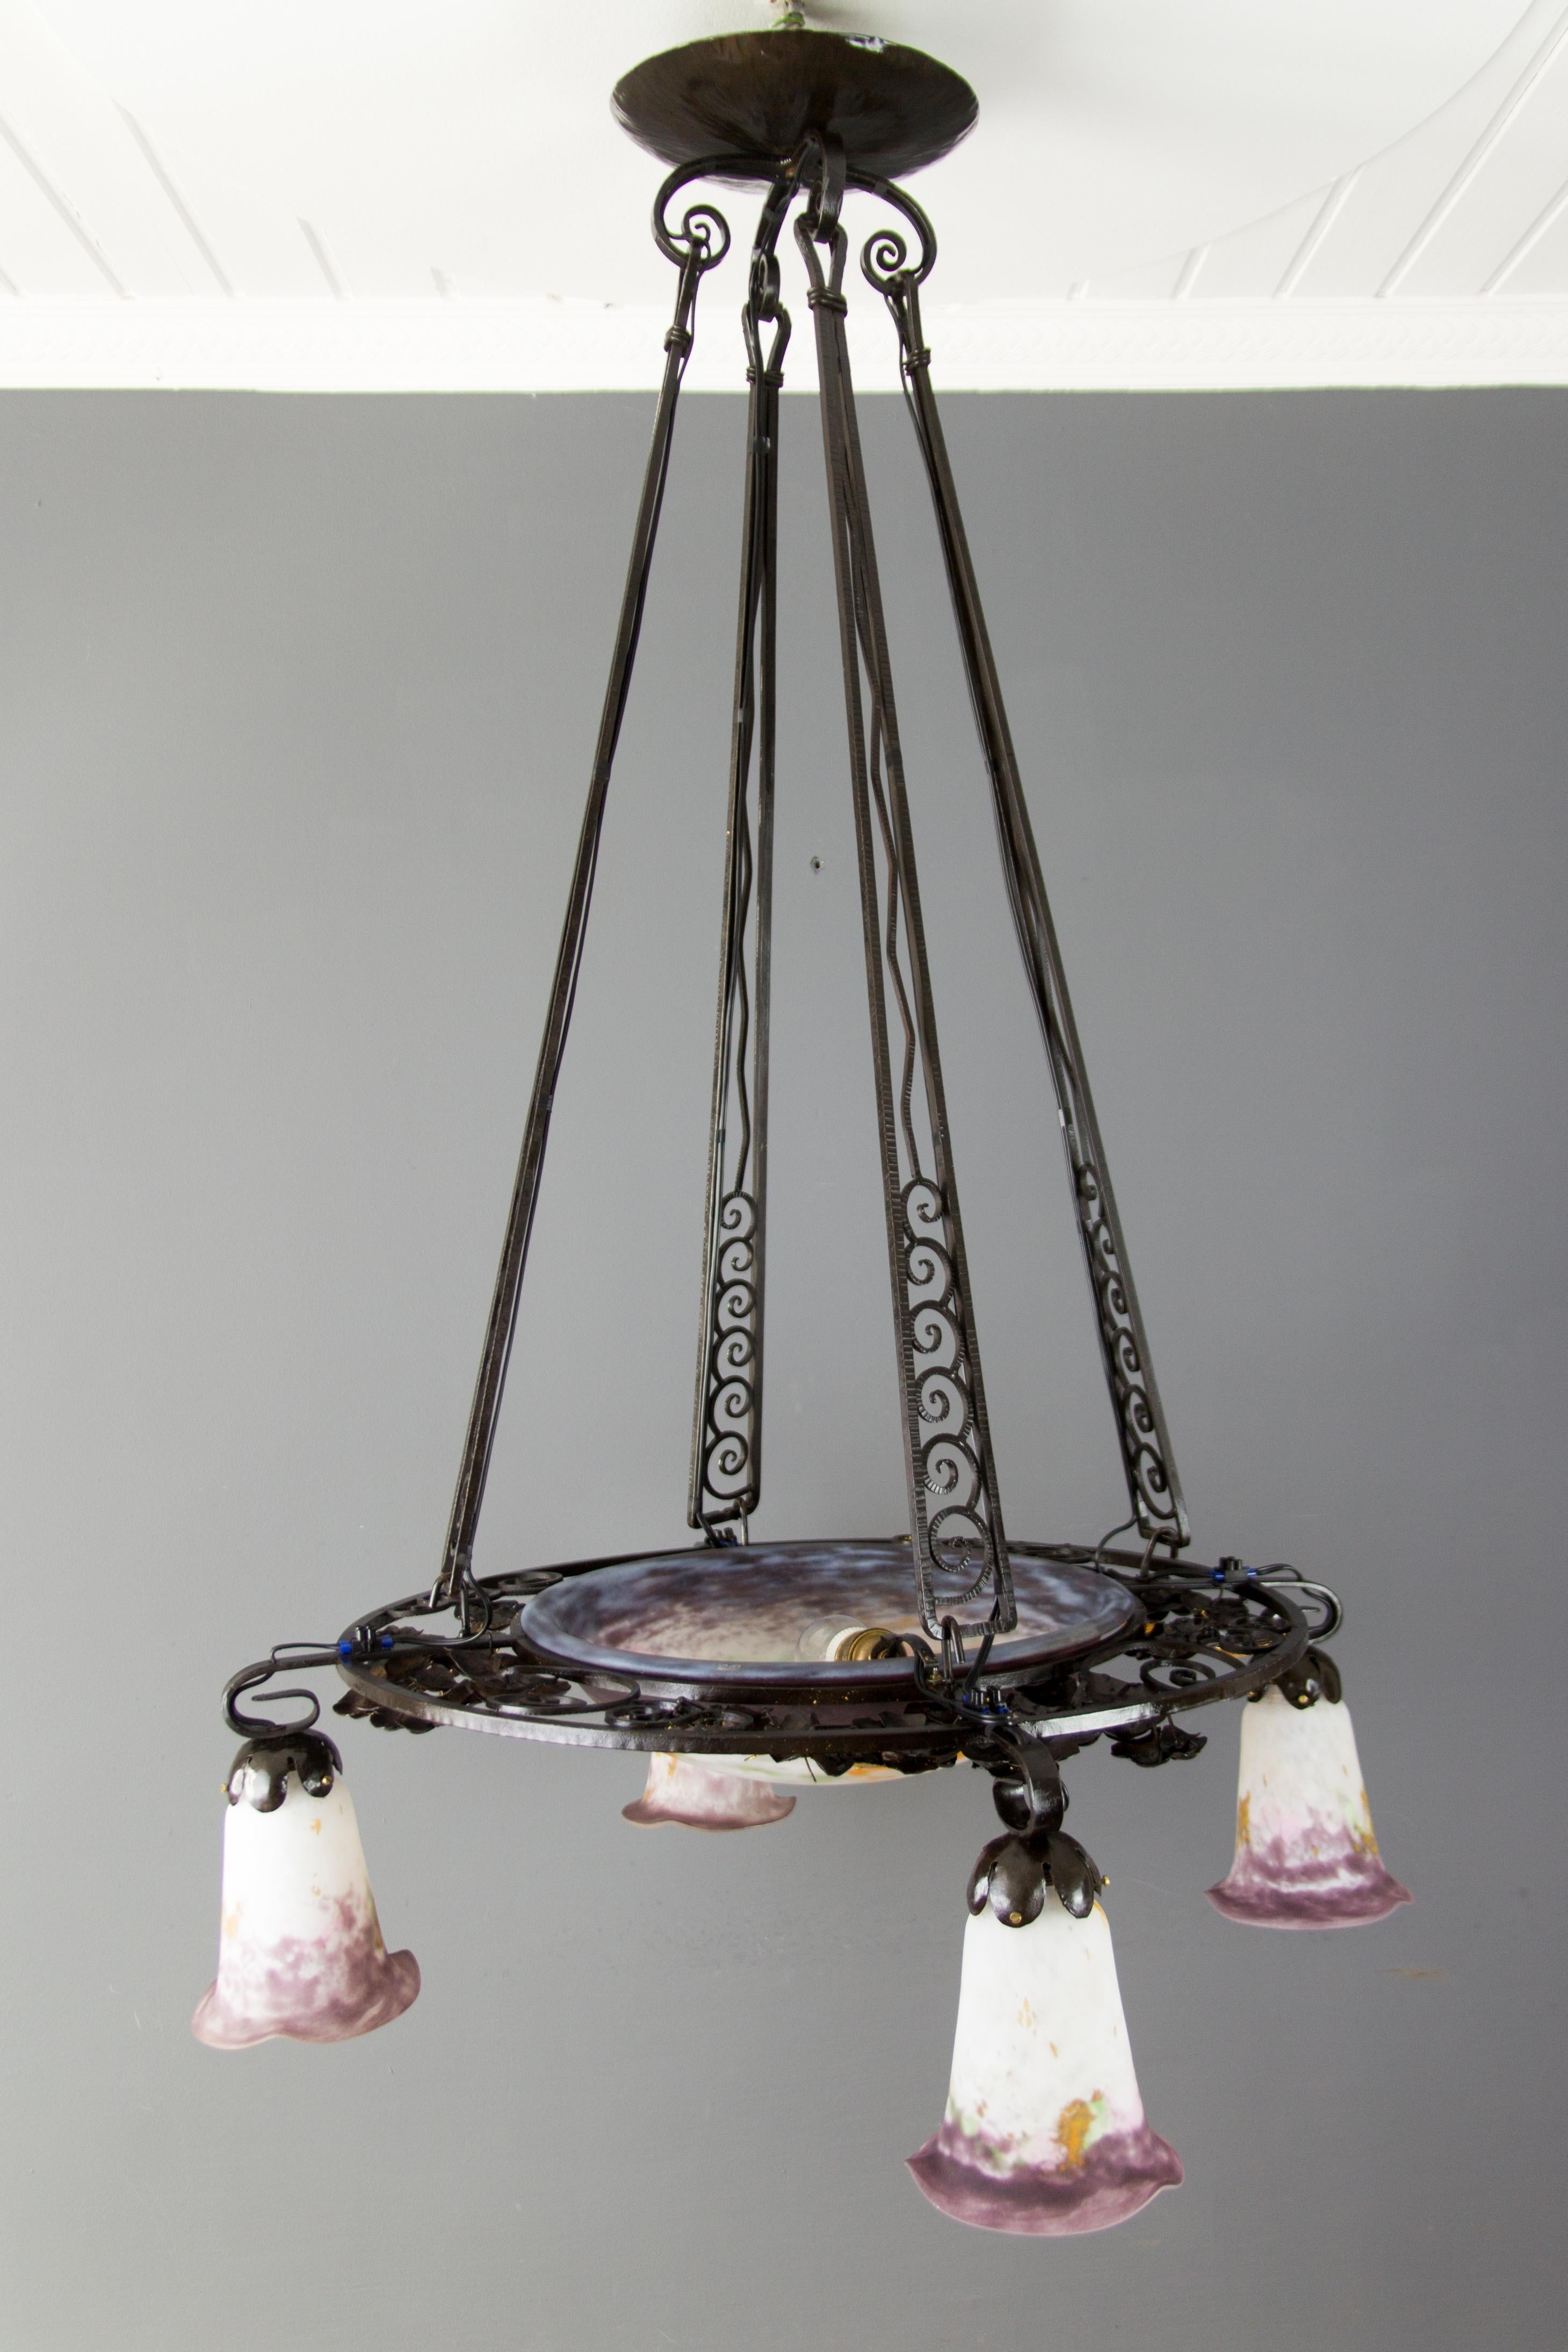 French Art Nouveau Five-Light Wrought Iron and Glass Chandelier Signed Lorrain 15